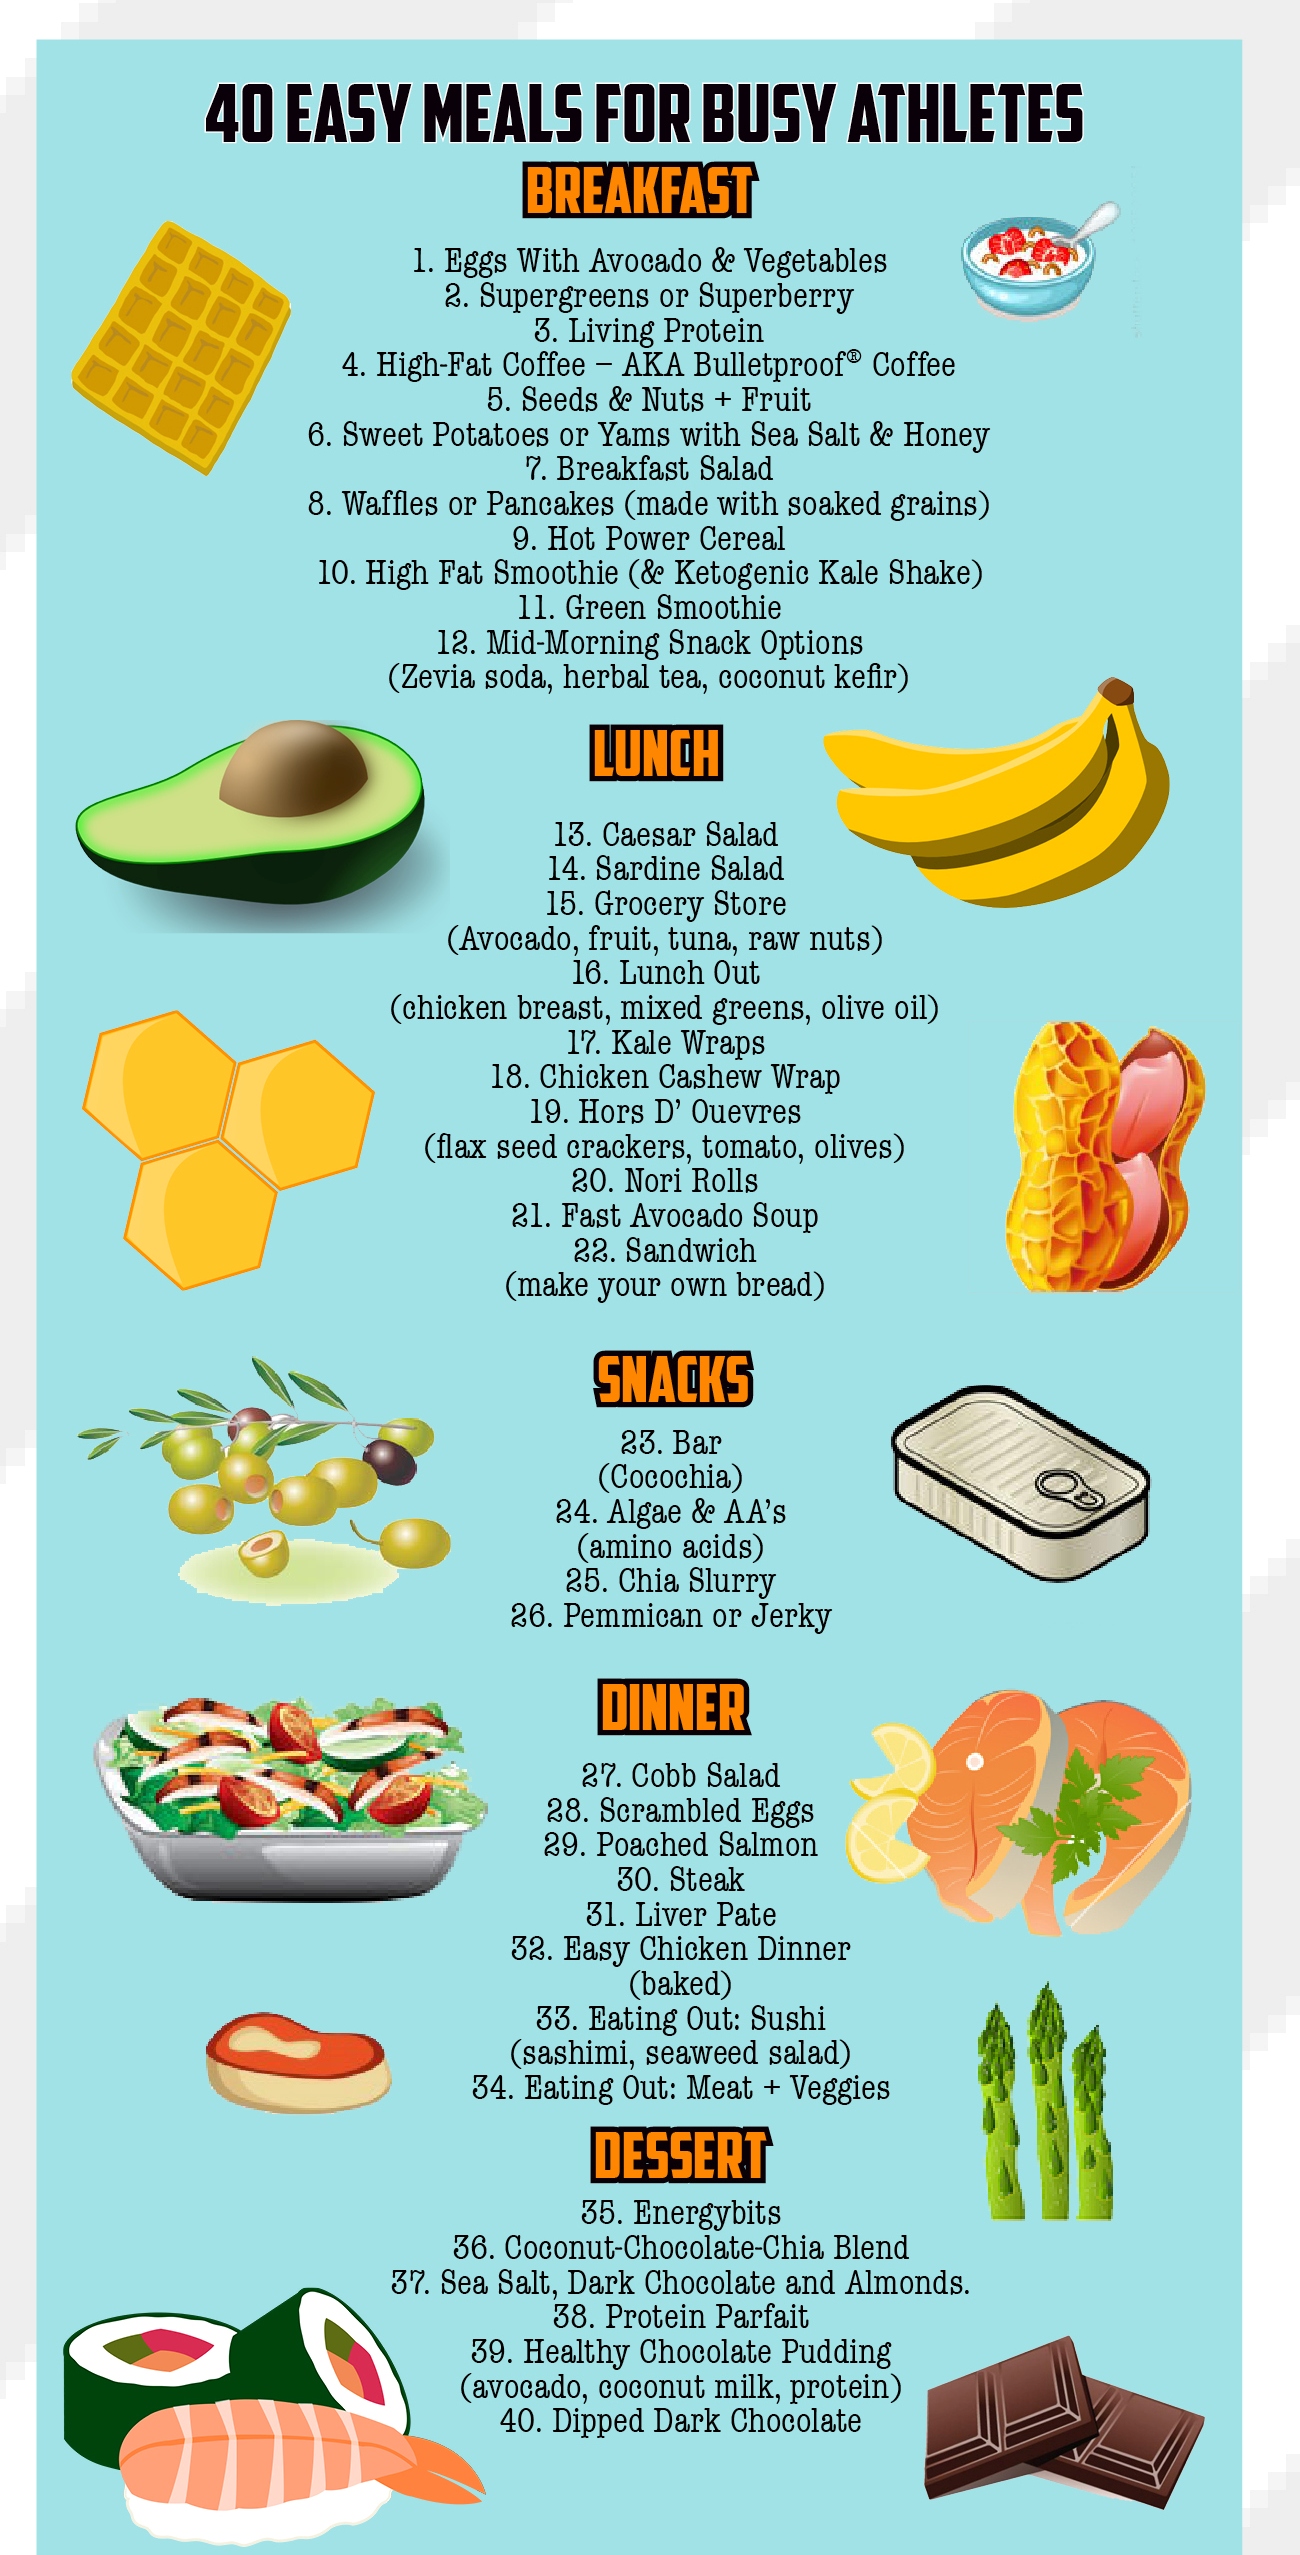 Quick and easy meal ideas for athletes